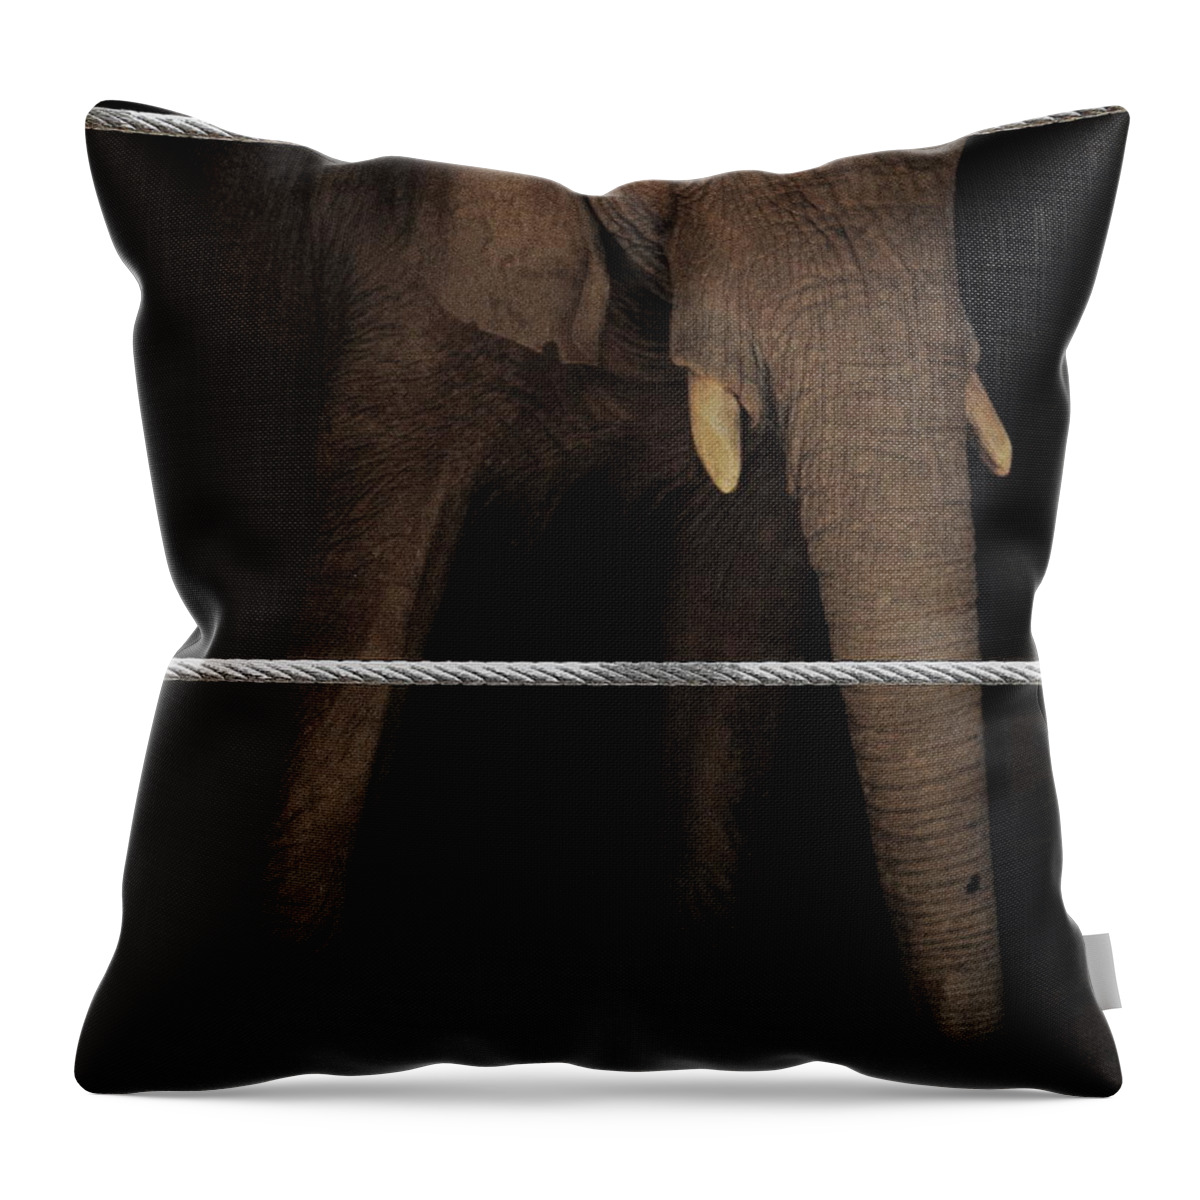 Elephants Throw Pillow featuring the photograph An Apology to Elephants by Jeff Heimlich